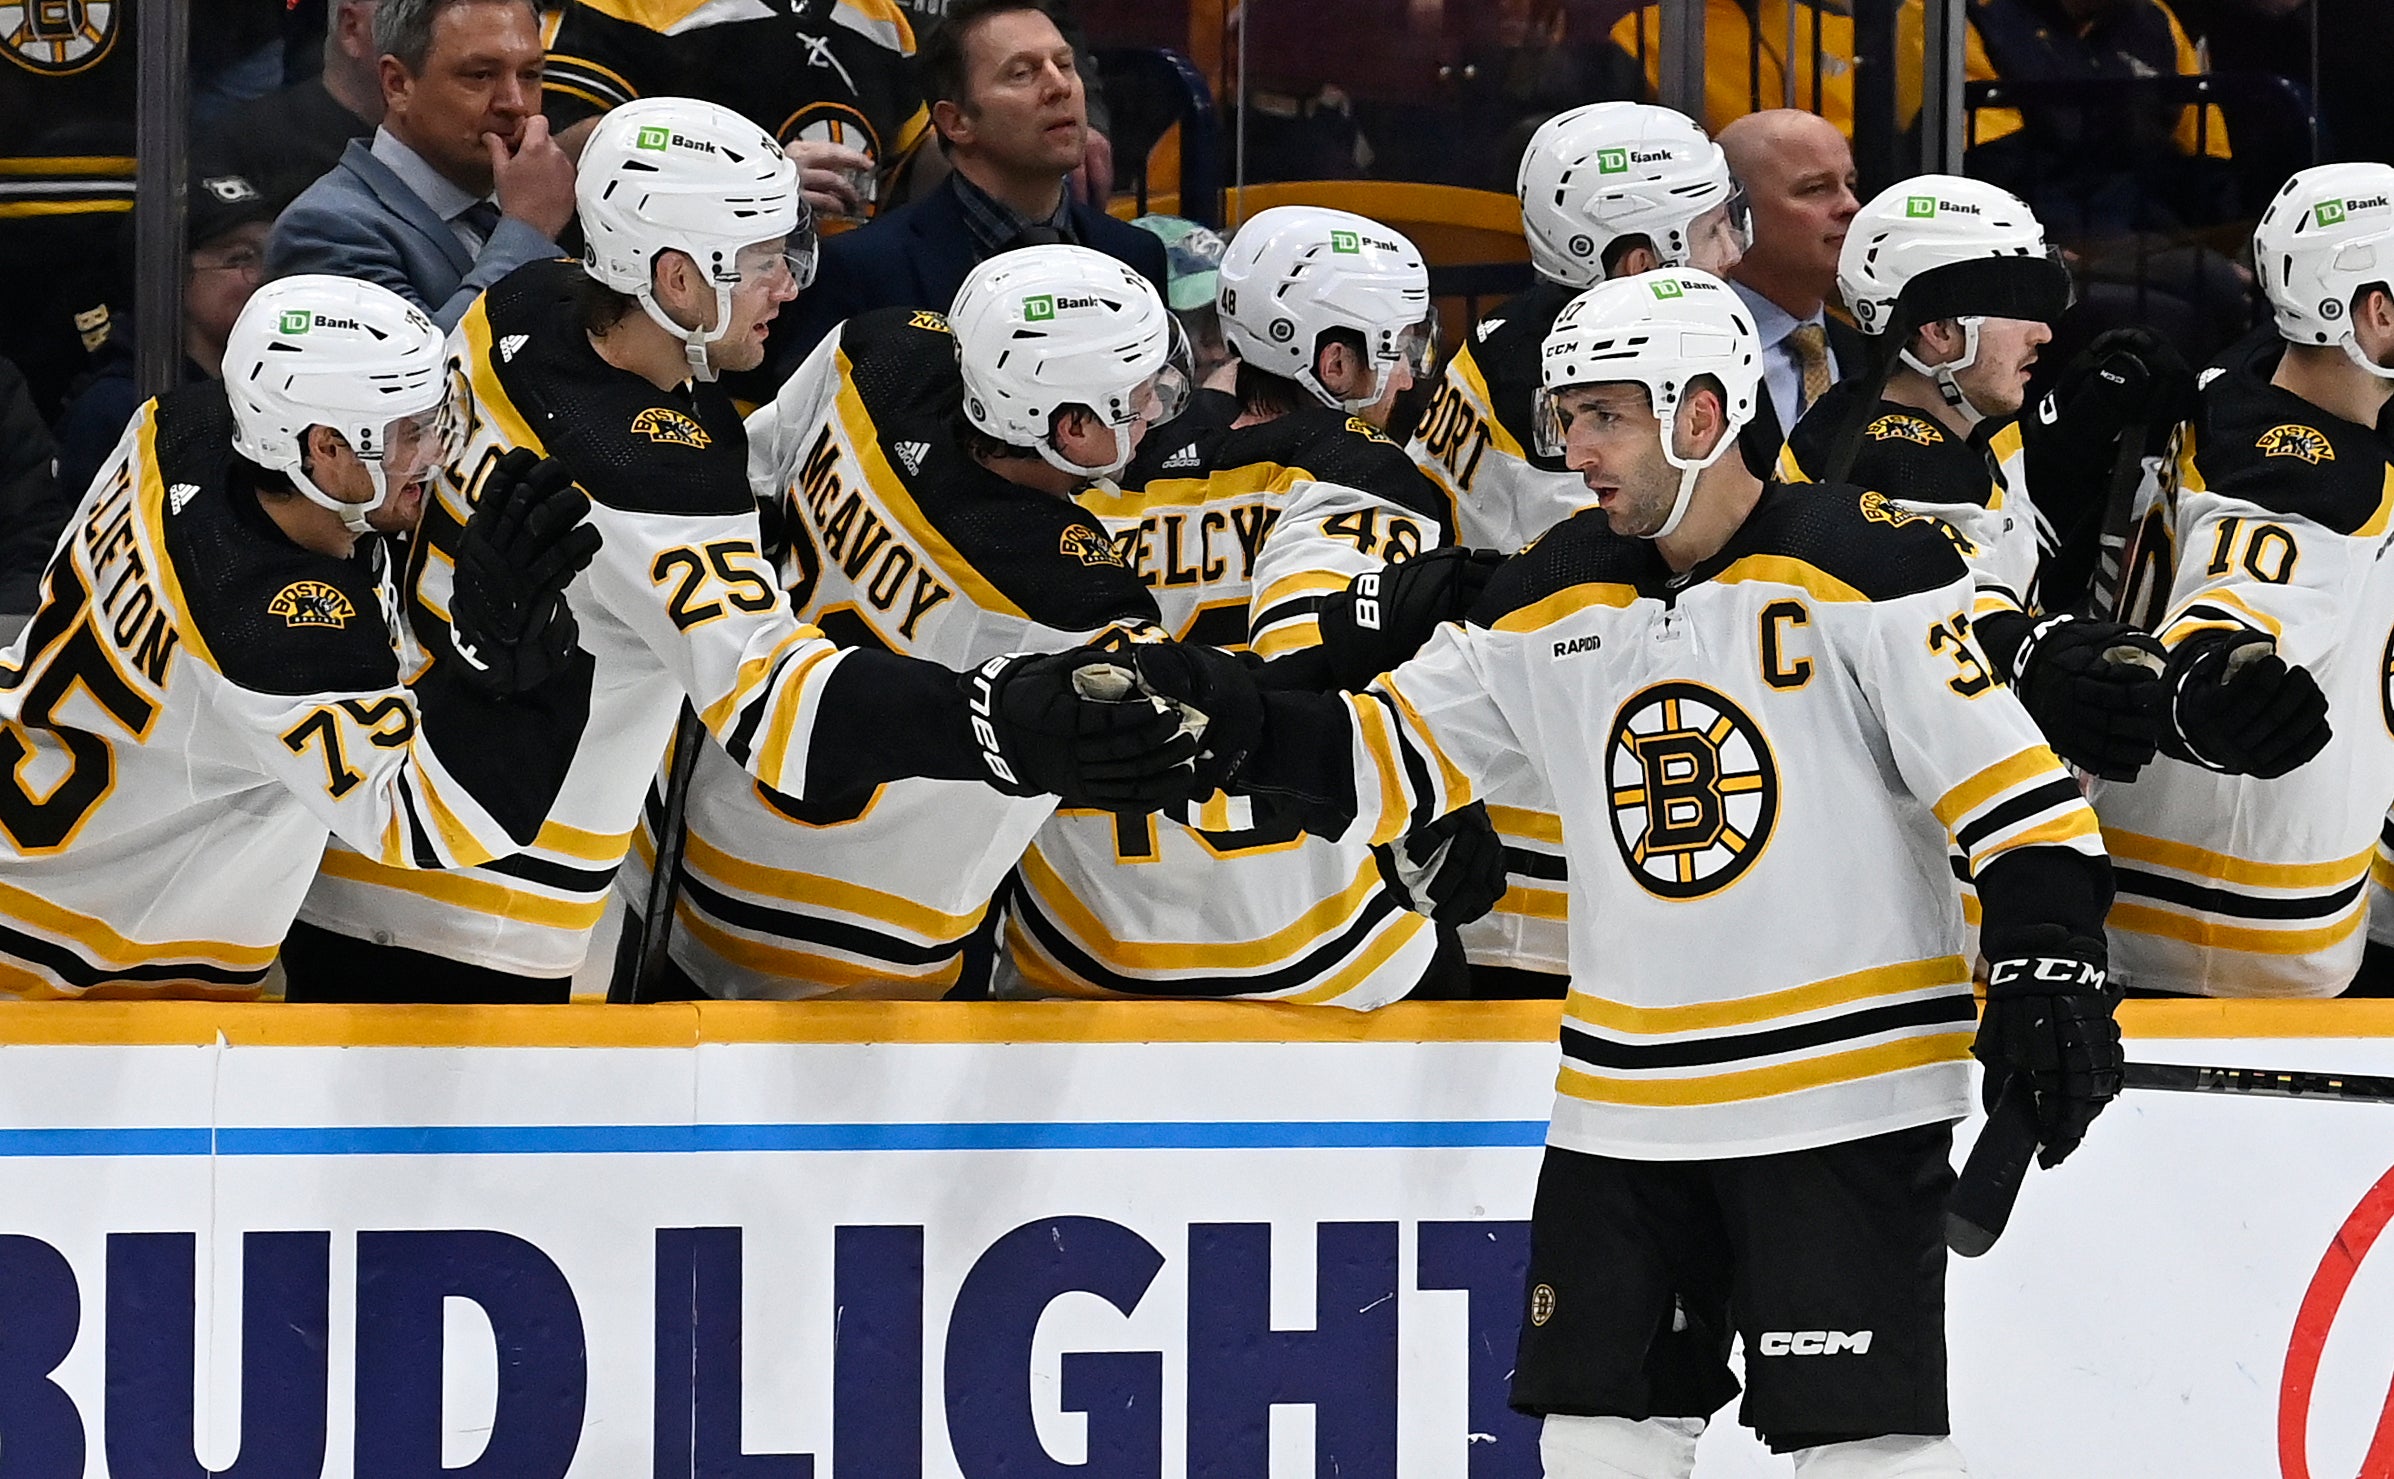 Boston Bruins center Patrice Bergeron (37) is congratulated after scoring a goal against the Nashville Predators during the second period of an NHL hockey game Thursday, Feb. 16, 2023, in Nashville, Tenn.